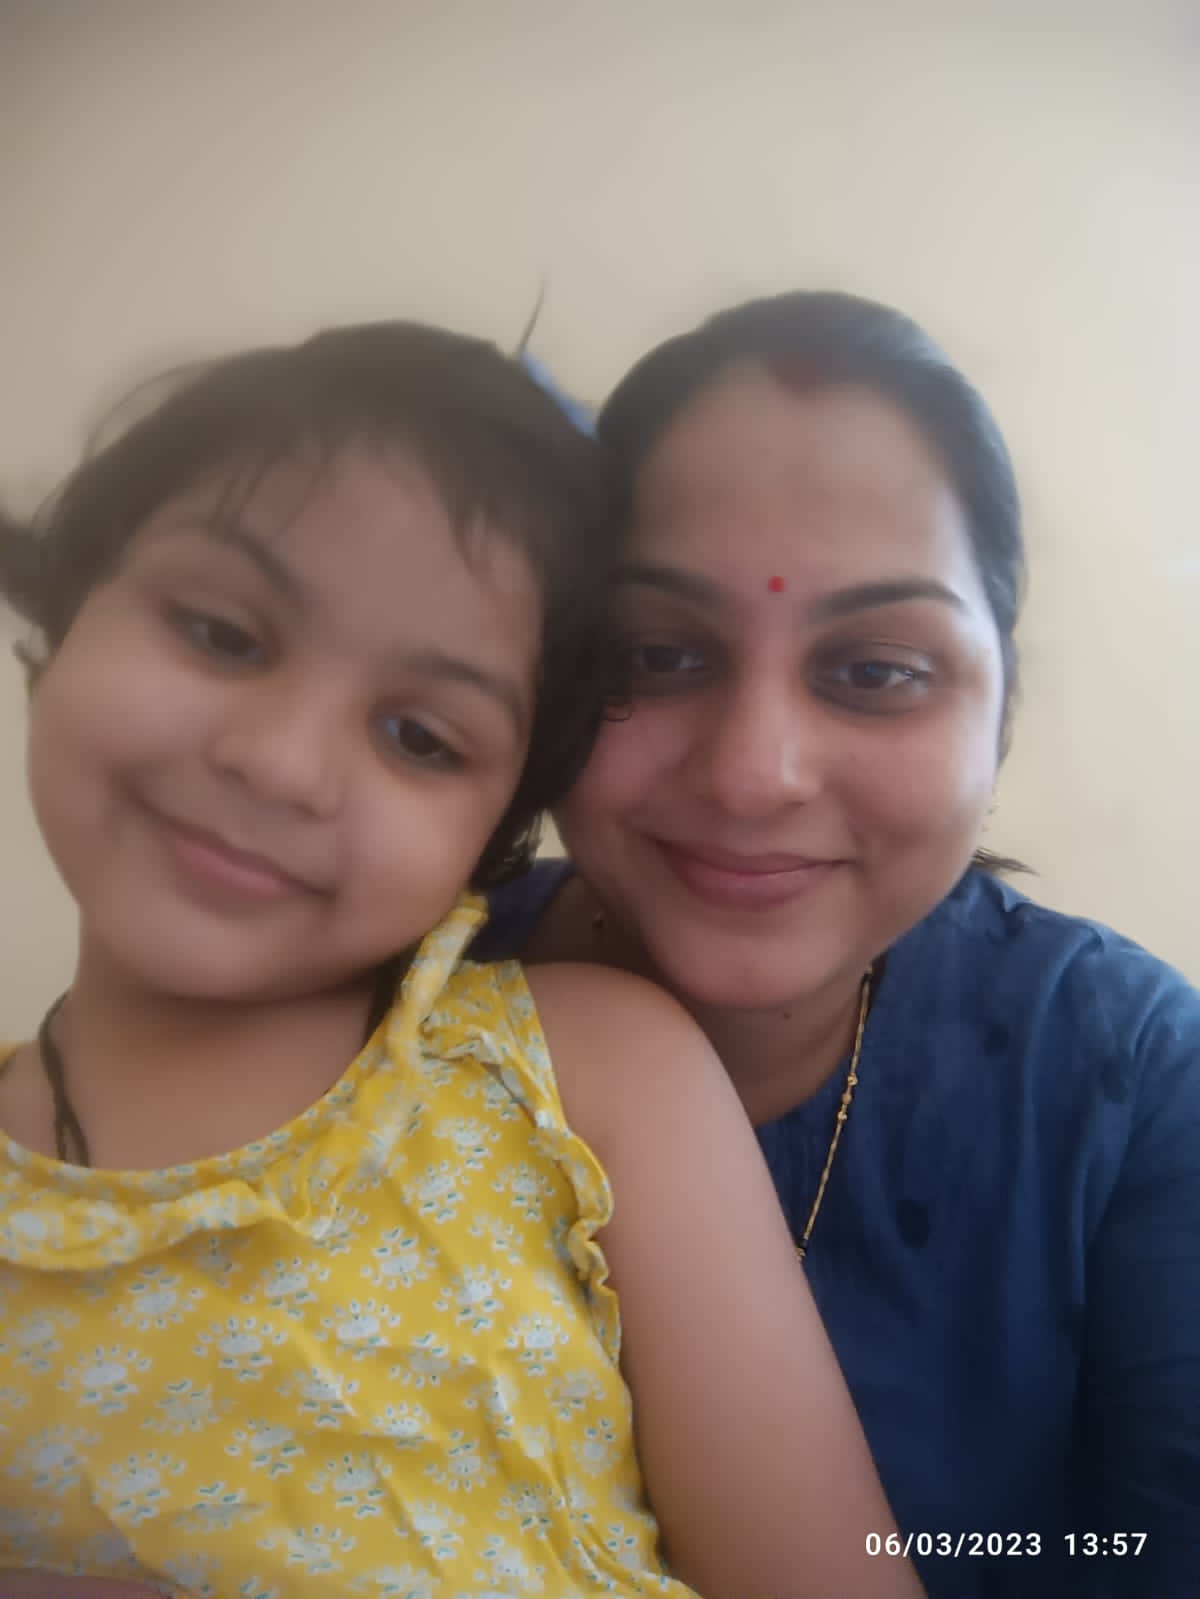 "I am really grateful for Neelakshi ma'am for her love, support and guidance! Vedanshi has transformed so much and looks forward to learning from ma'am now!"